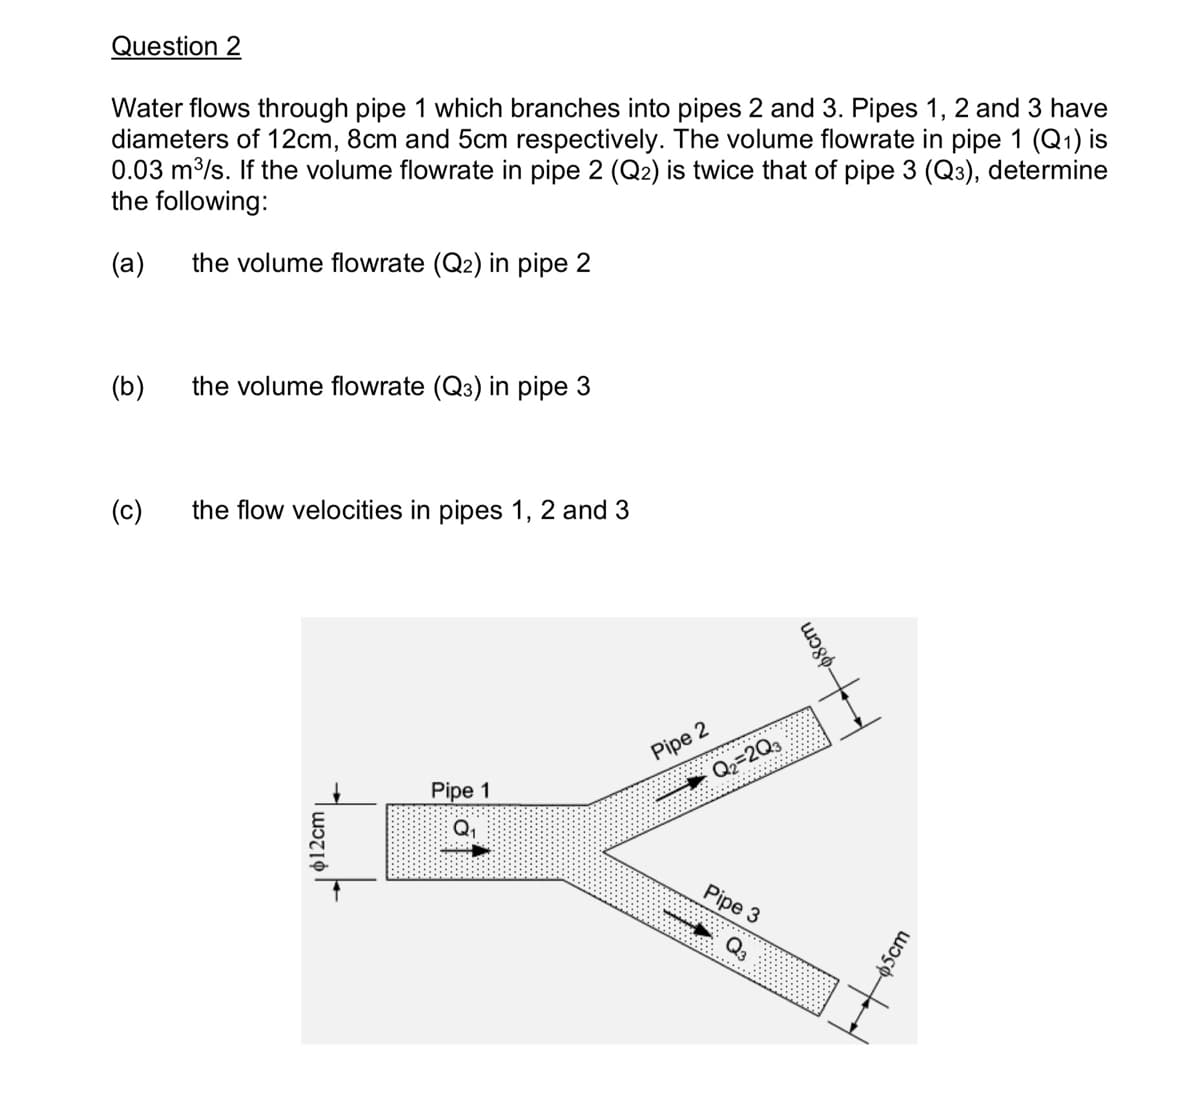 Question 2
Water flows through pipe 1 which branches into pipes 2 and 3. Pipes 1, 2 and 3 have
diameters of 12cm, 8cm and 5cm respectively. The volume flowrate in pipe 1 (Q₁) is
0.03 m³/s. If the volume flowrate in pipe 2 (Q2) is twice that of pipe 3 (Q3), determine
the following:
(a)
the volume flowrate (Q2) in pipe 2
(b)
(c)
the volume flowrate (Q3) in pipe 3
the flow velocities in pipes 1, 2 and 3
$12cm
Pipe 1
Pipe 2
Q2=2Q3
Pipe 3
-
5cm